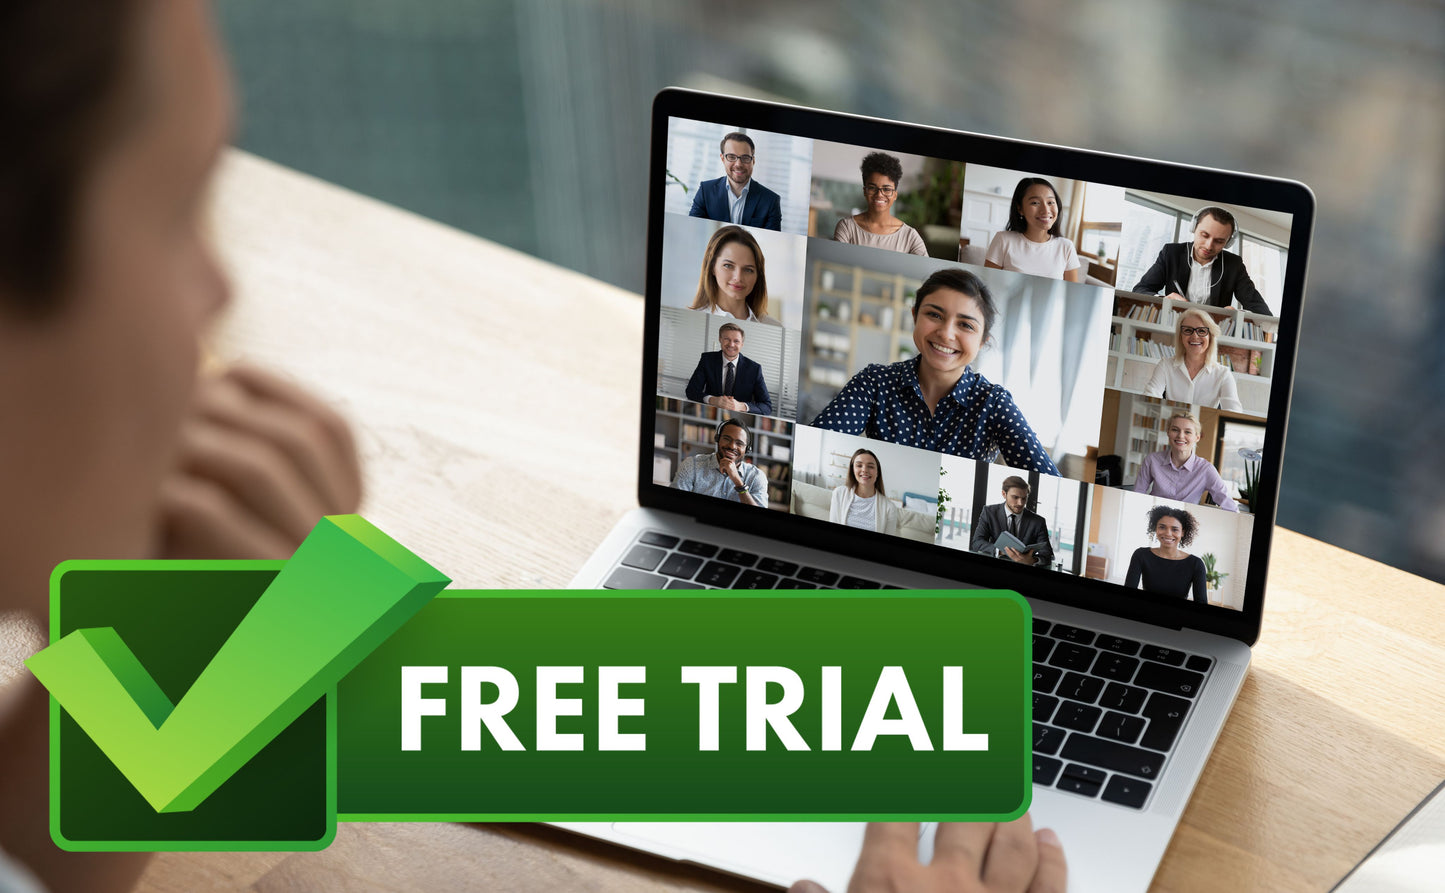 [FREE TRIAL] Business GROWth CommUNITY ZOOM Call - SOLD OUT!